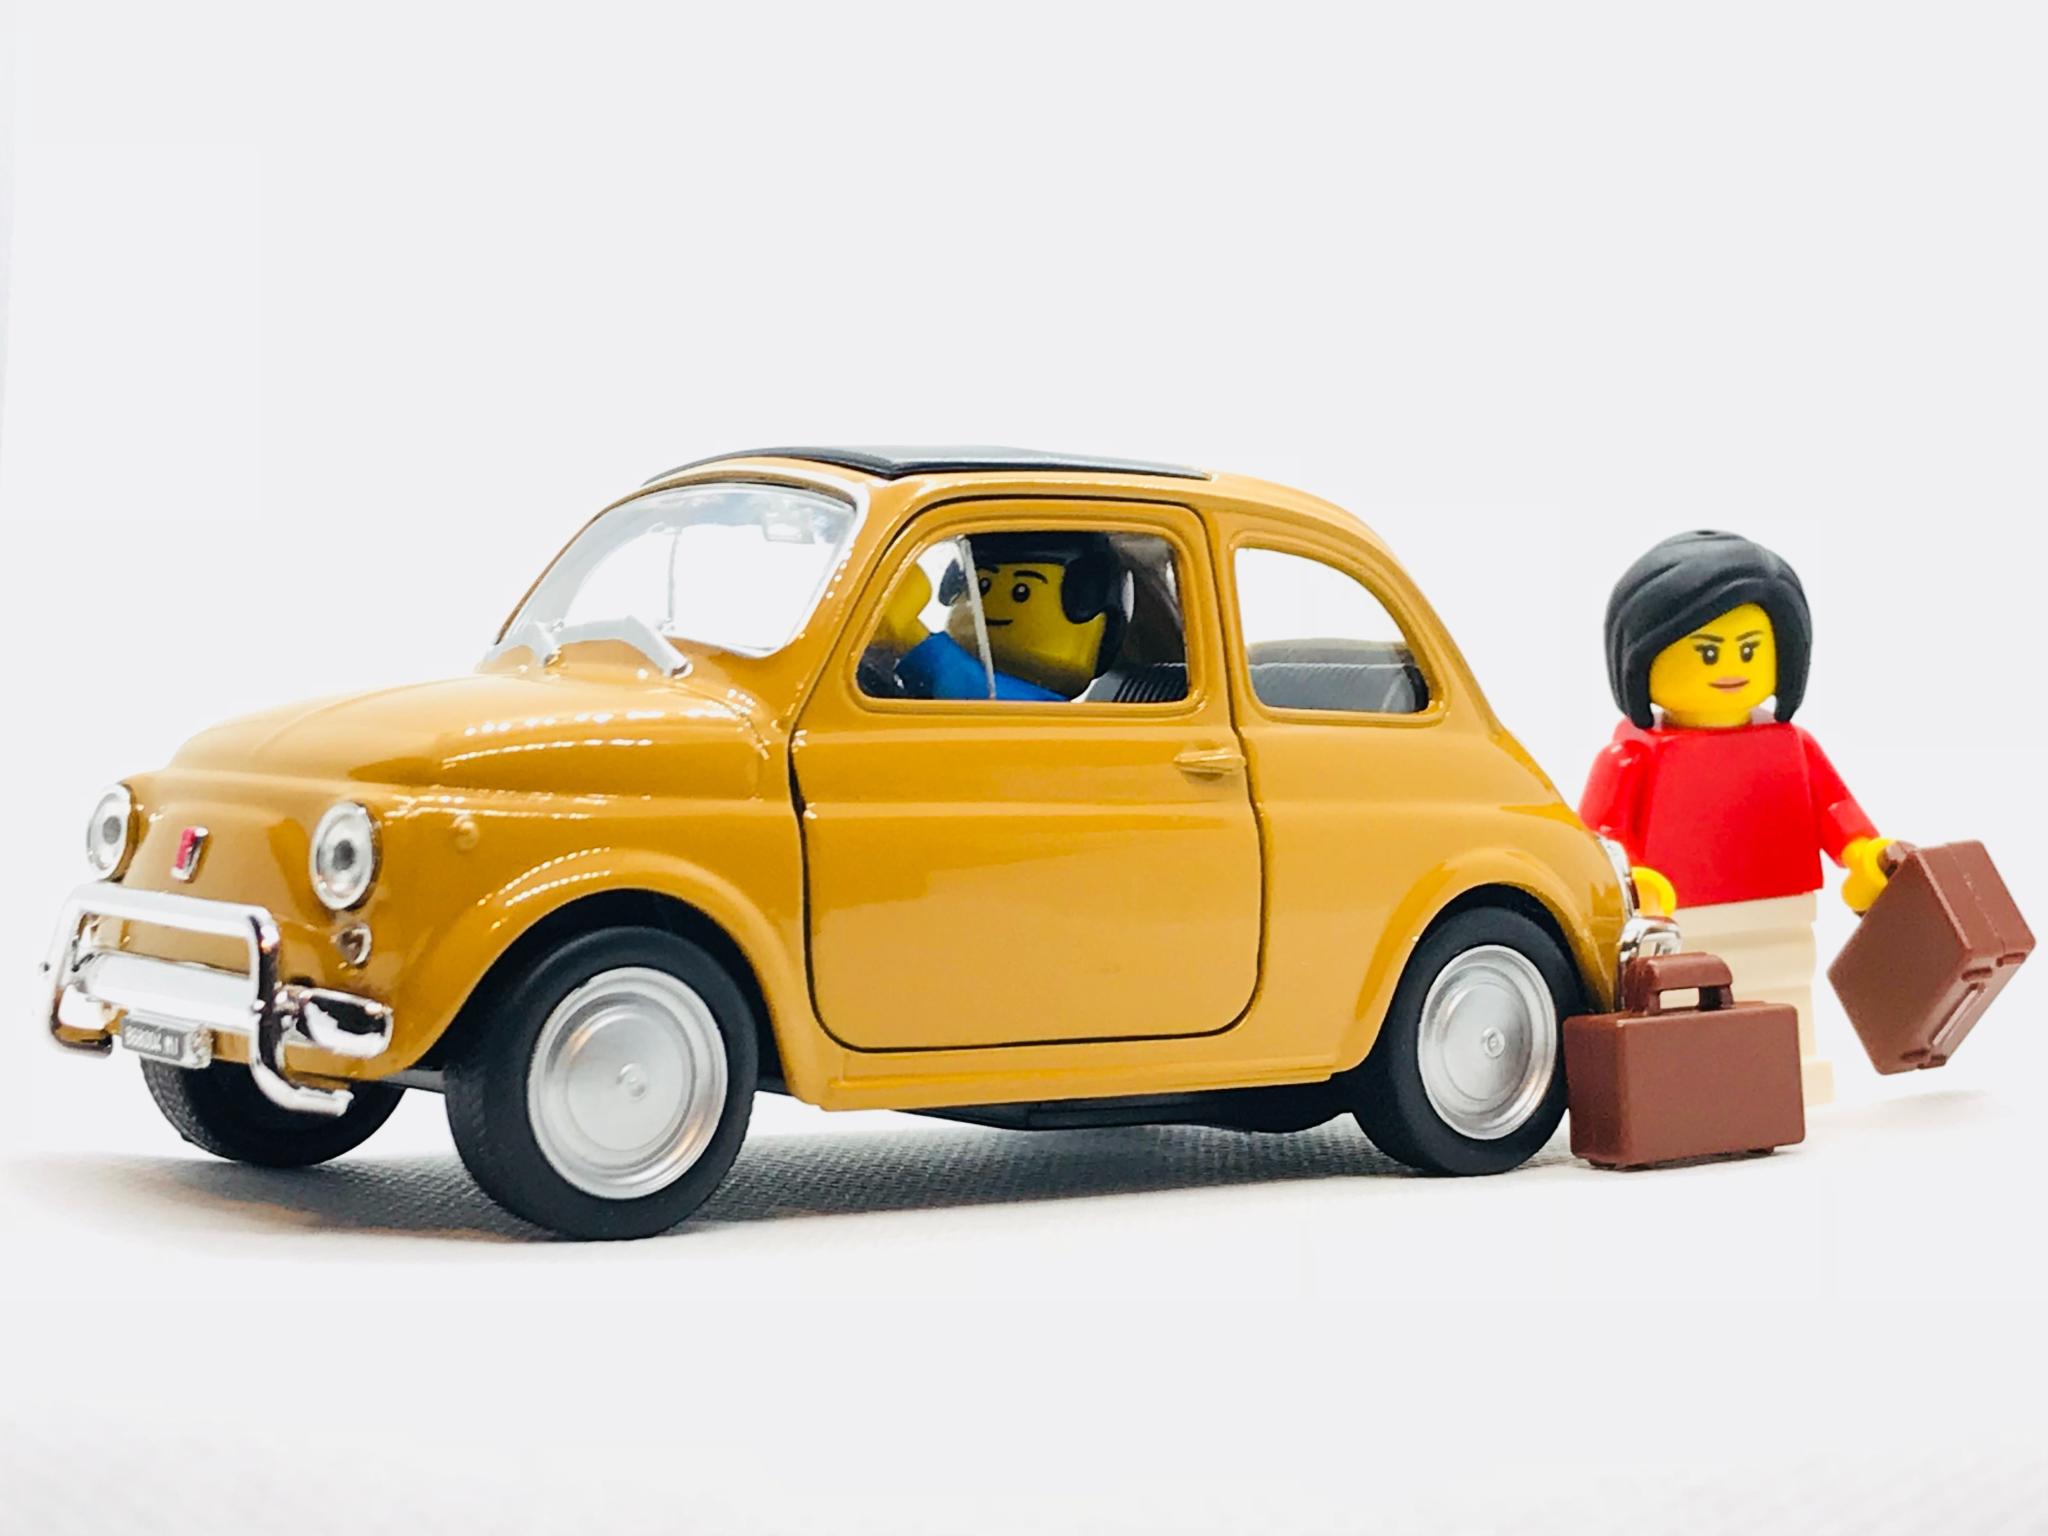 Toy car with Lego people as passengers